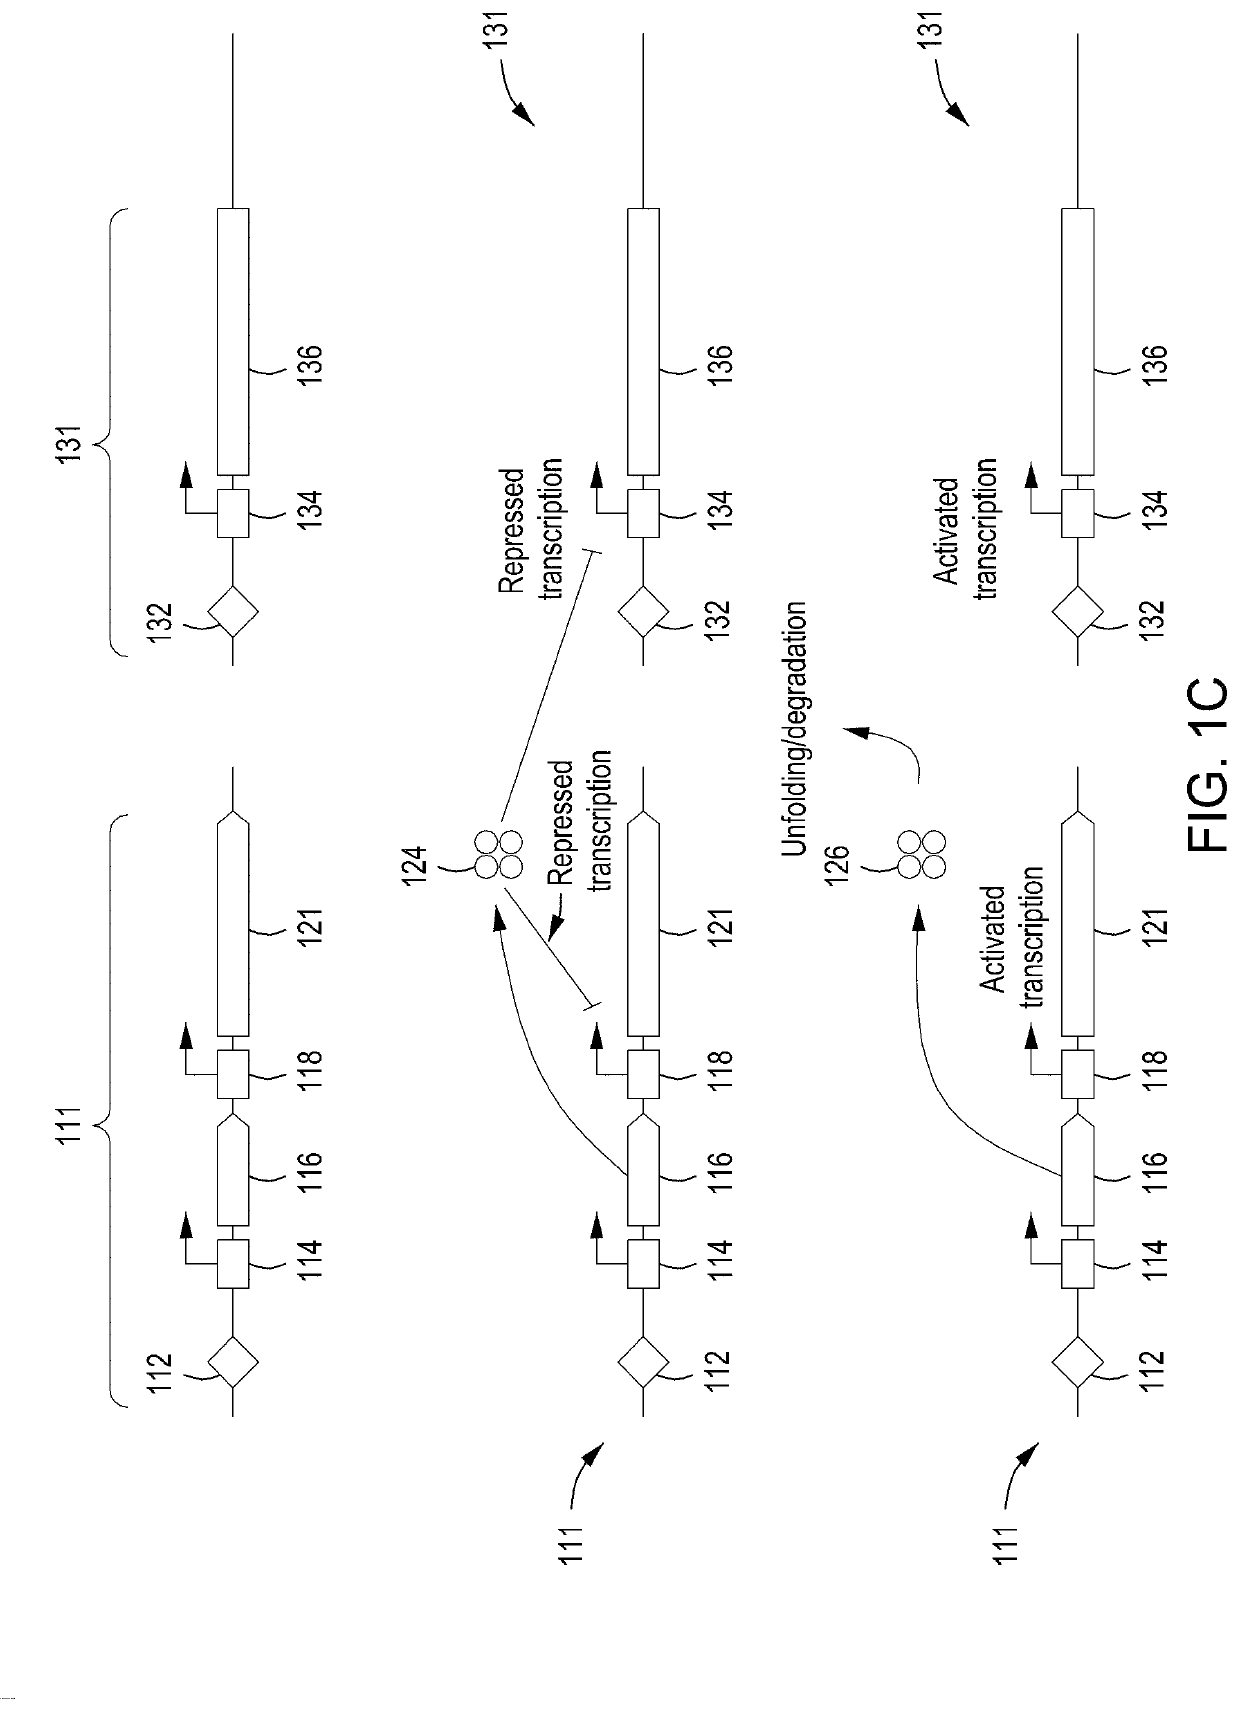 Instruments, modules, and methods for improved detection of edited sequences in live cells